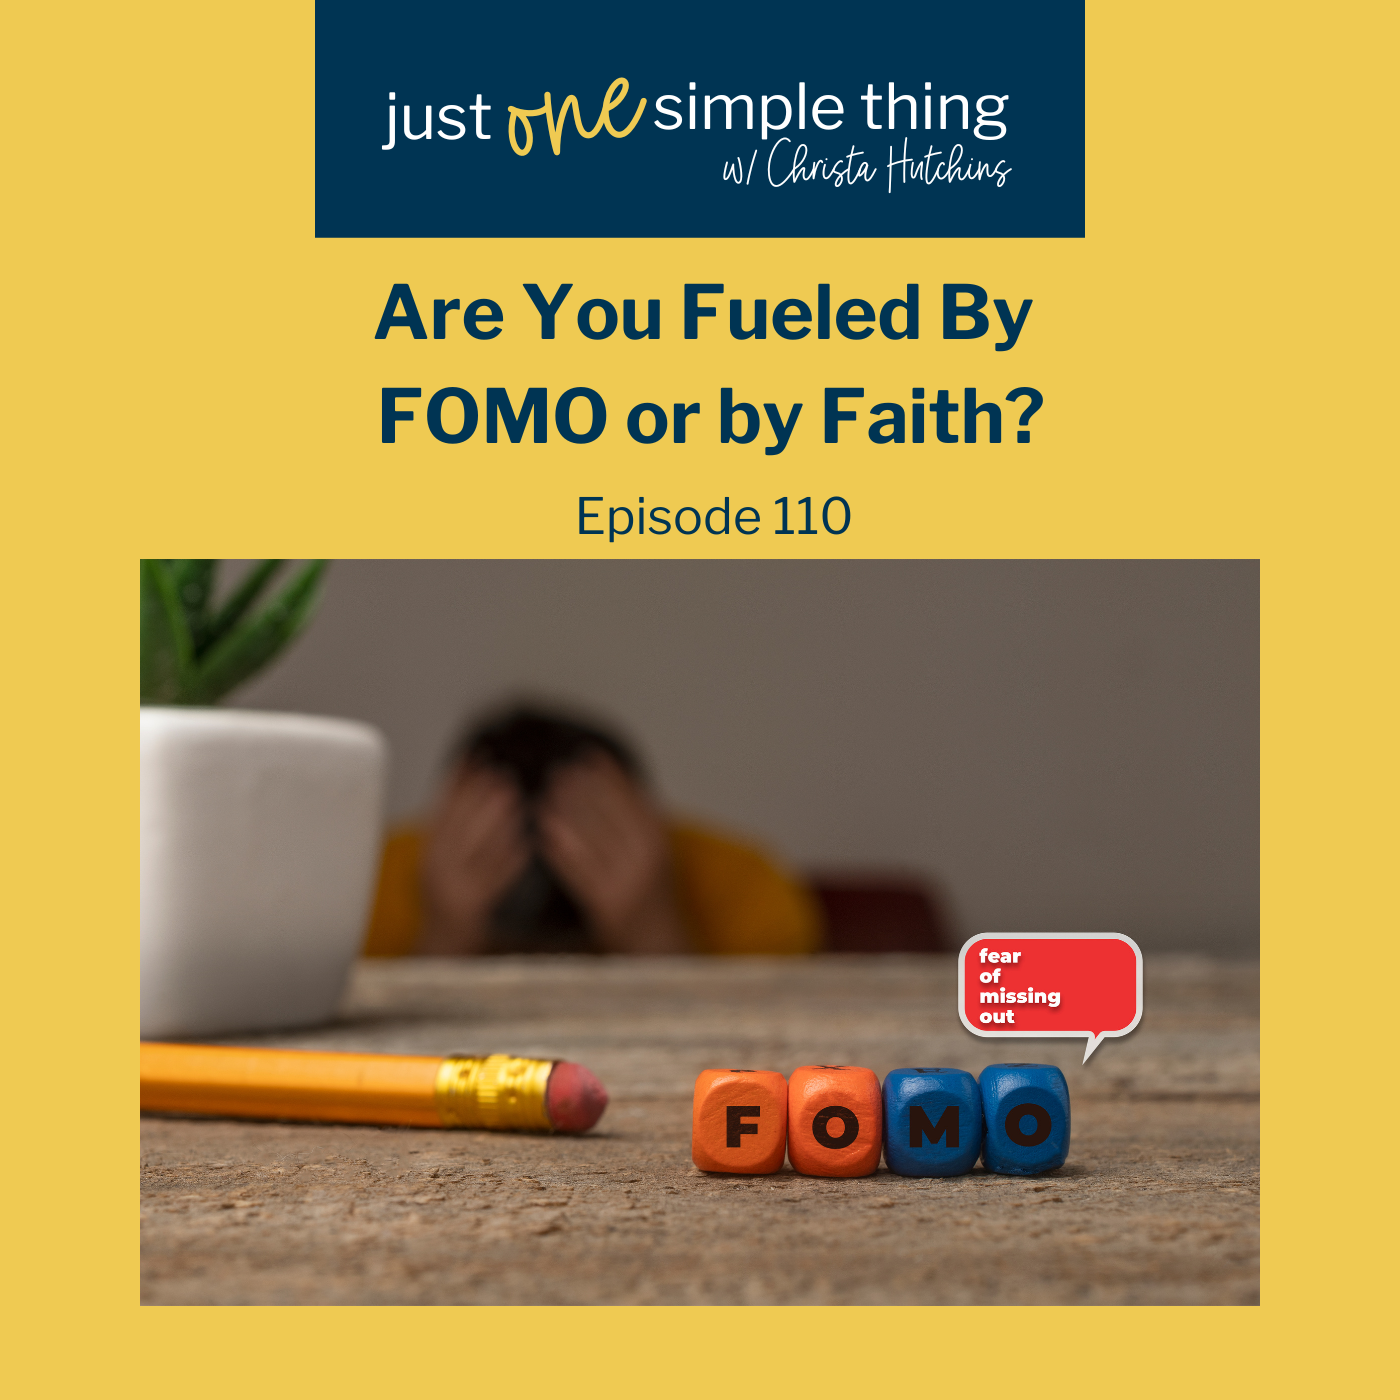 Are You Fueled by FOMO or Faith?